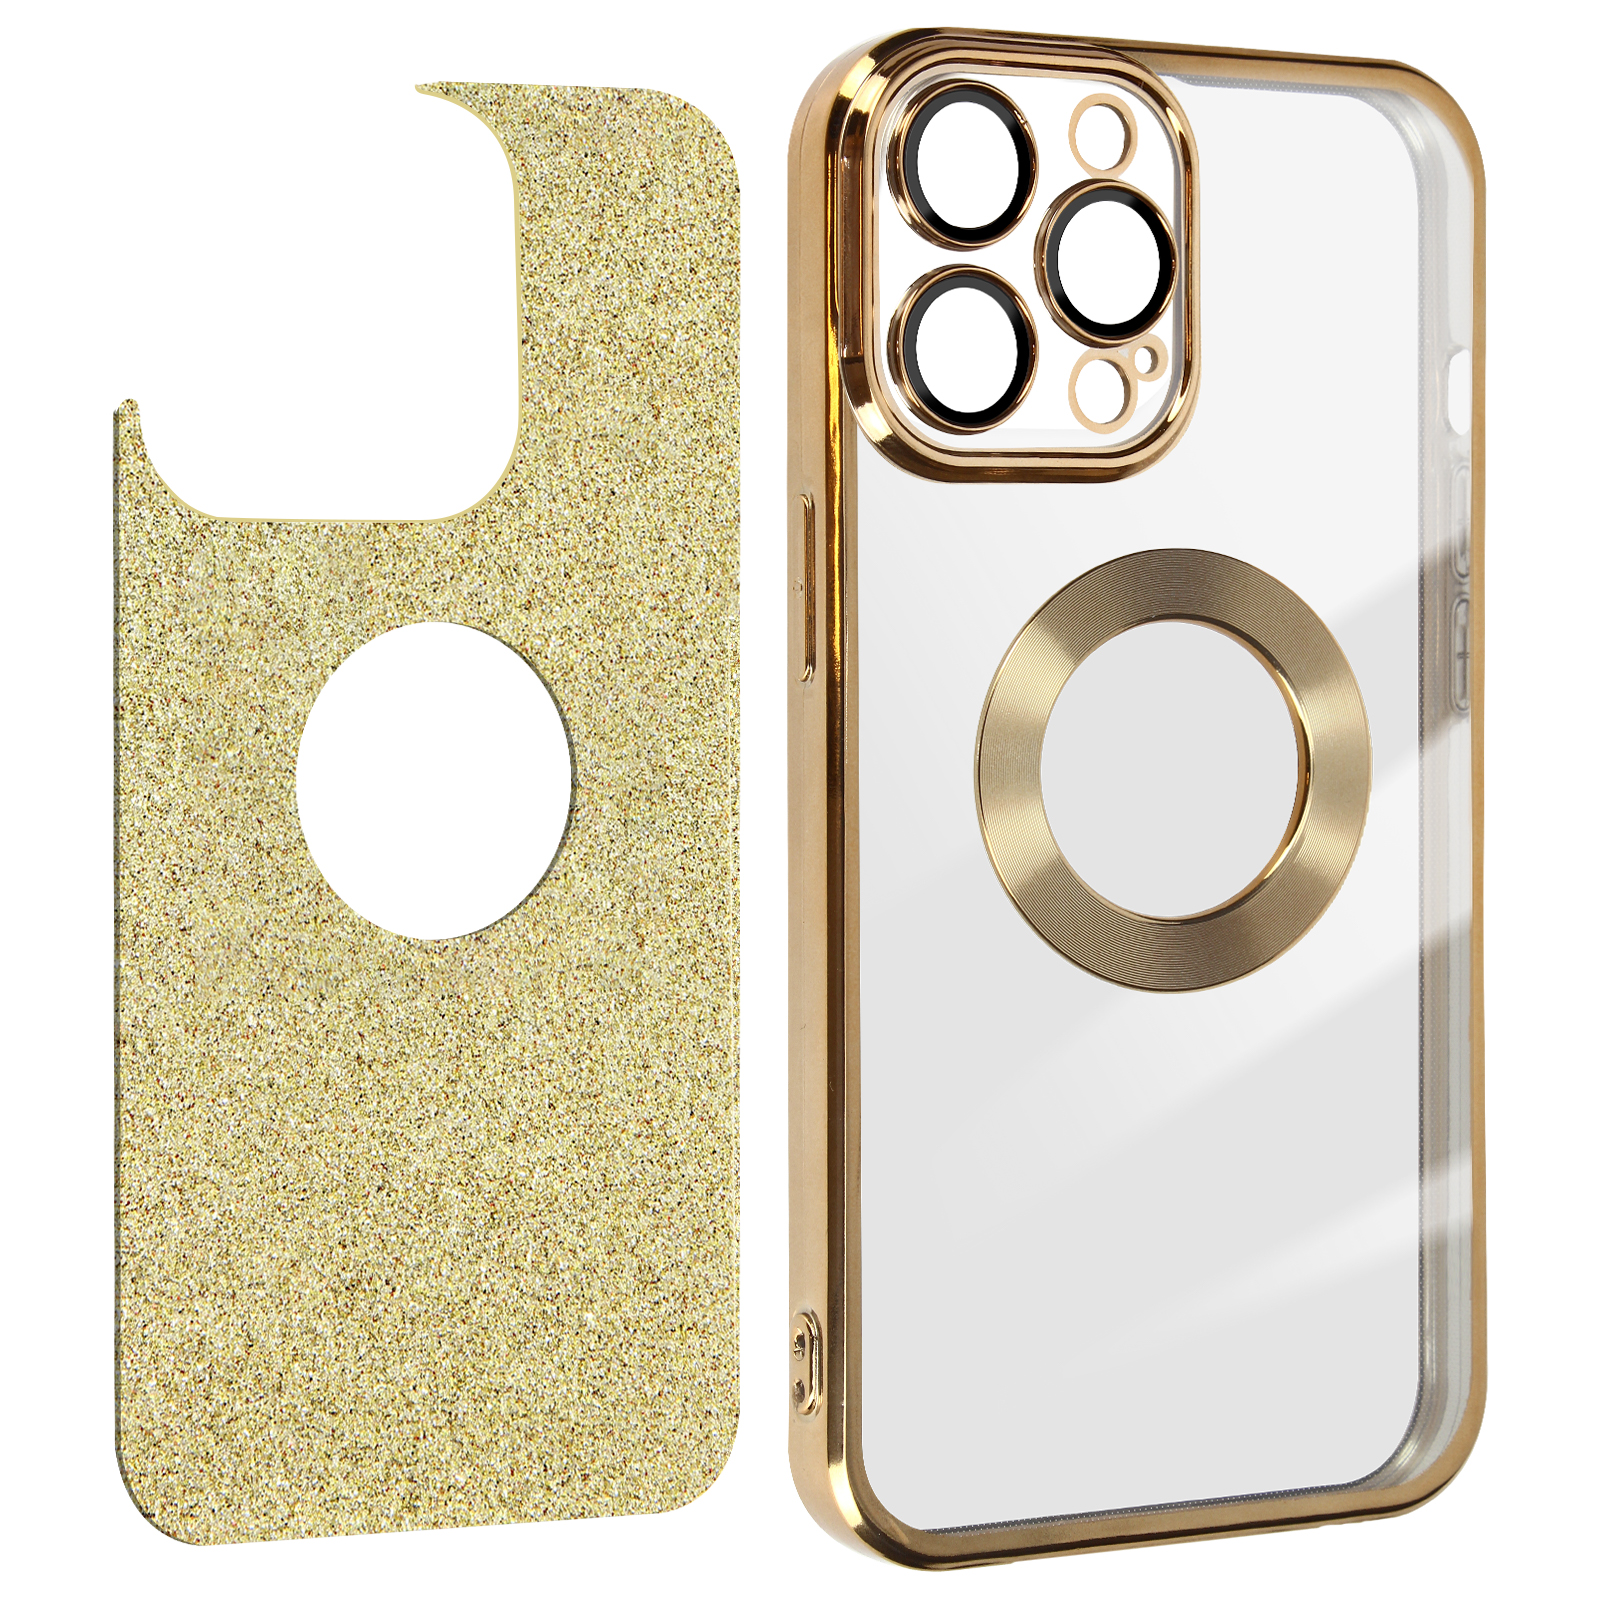 12 Pro Backcover, AVIZAR Gold Series, iPhone Spark Max, Protecam Apple,